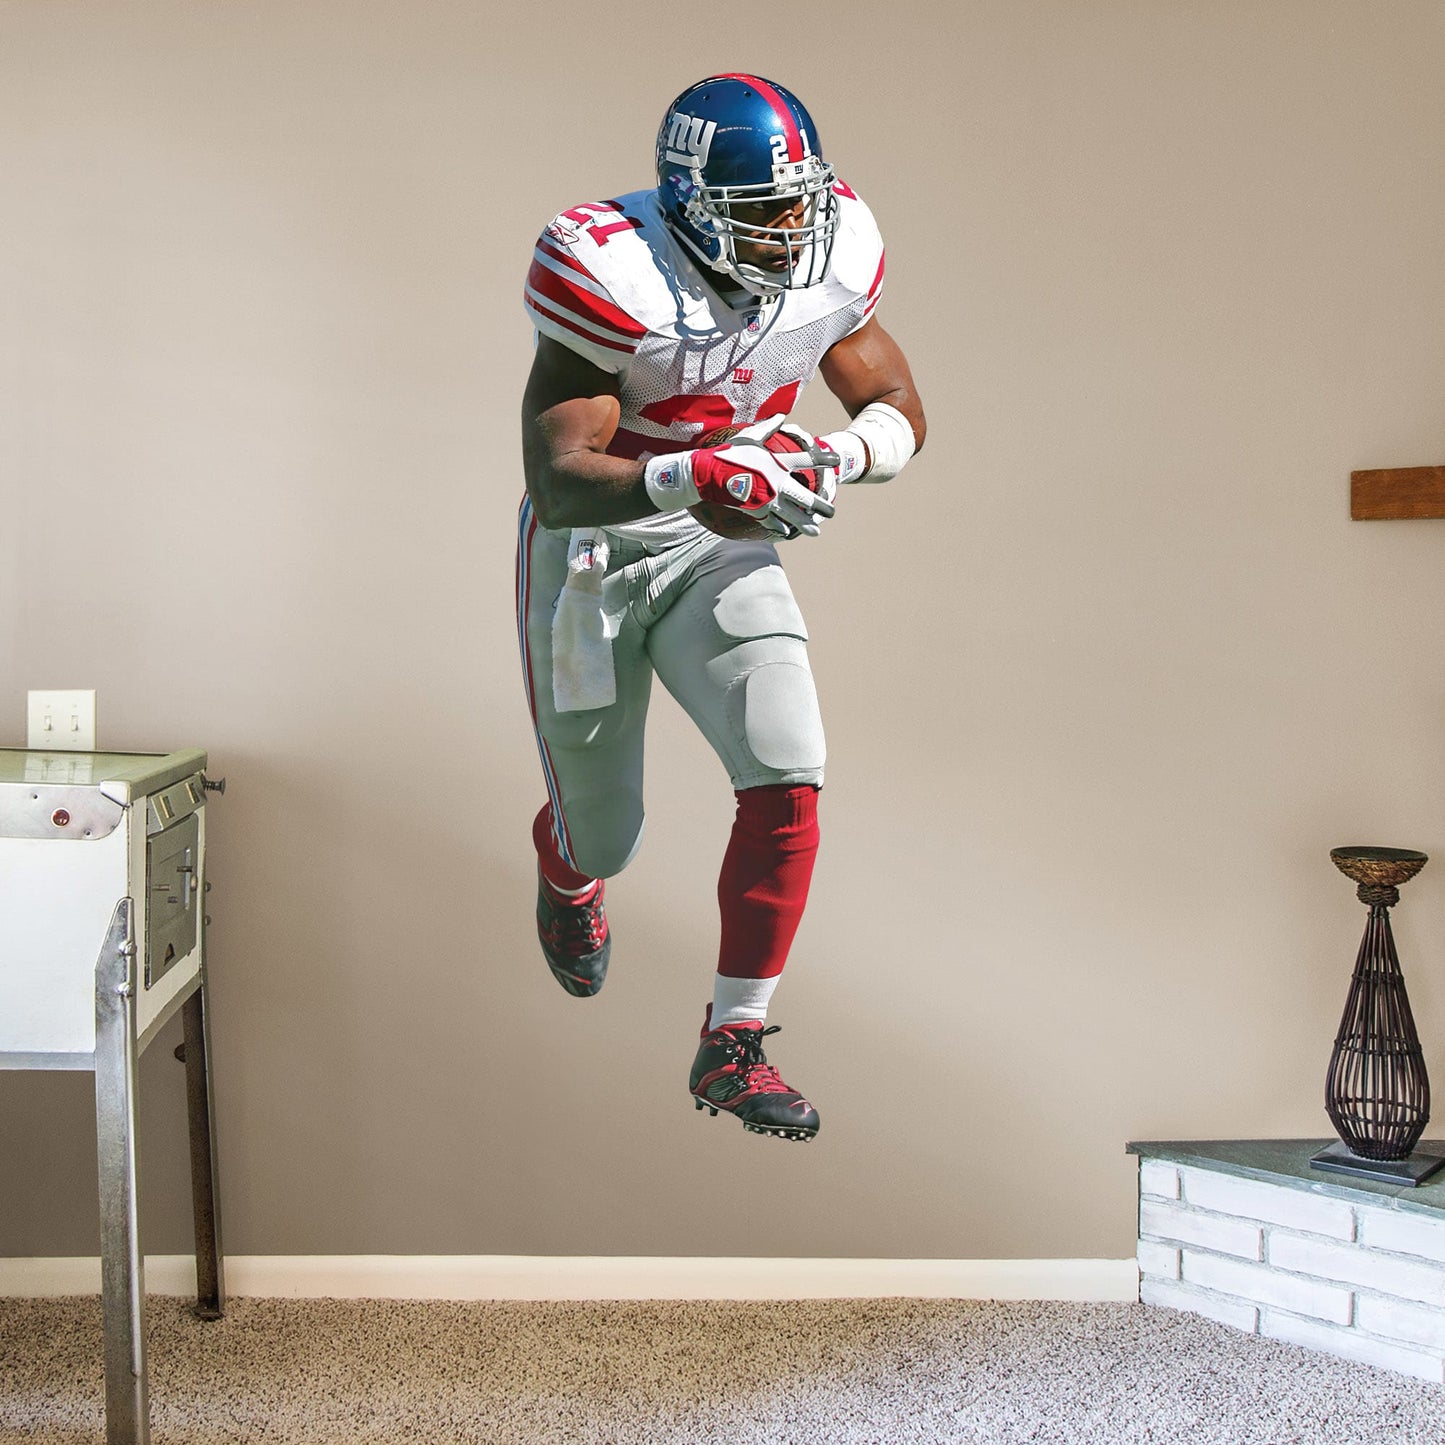 New York Giants: Tiki Barber Legend - NFL Removable Wall Adhesive Wall Decal Large